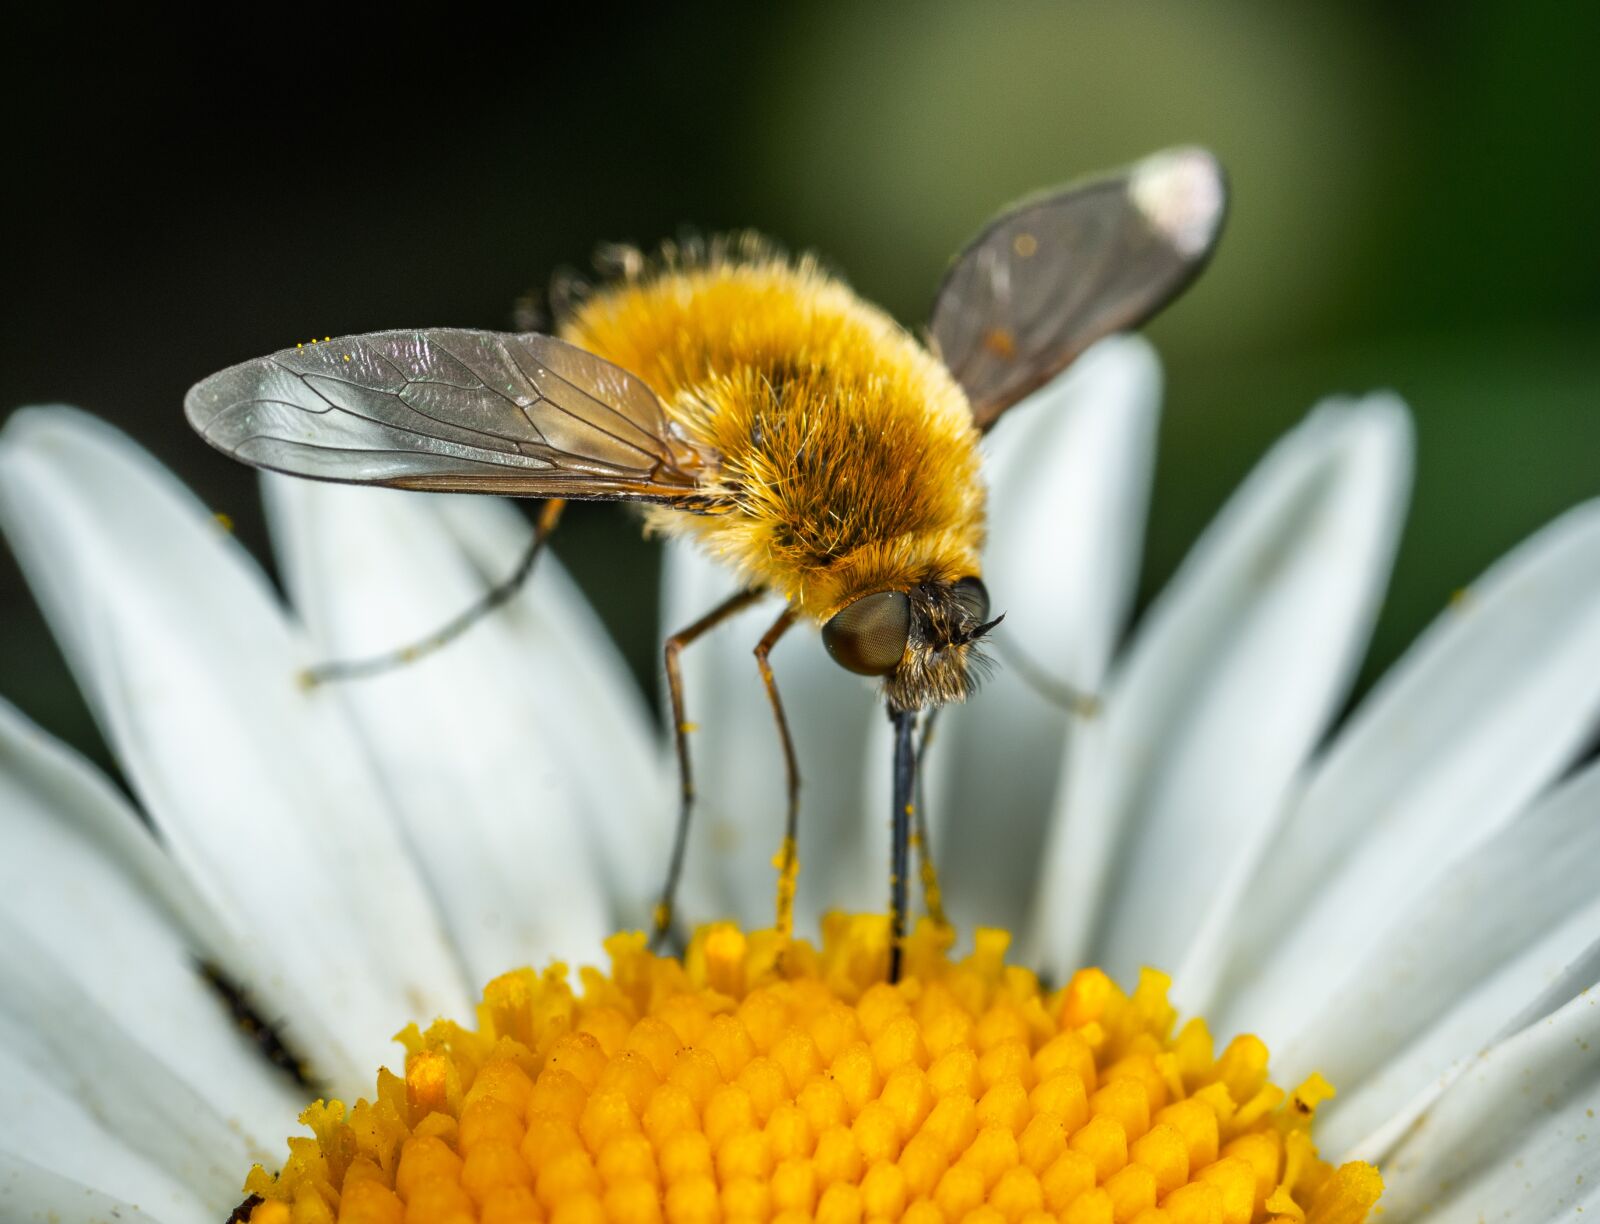 Sony a7R II sample photo. Daisy, diptera, insect photography